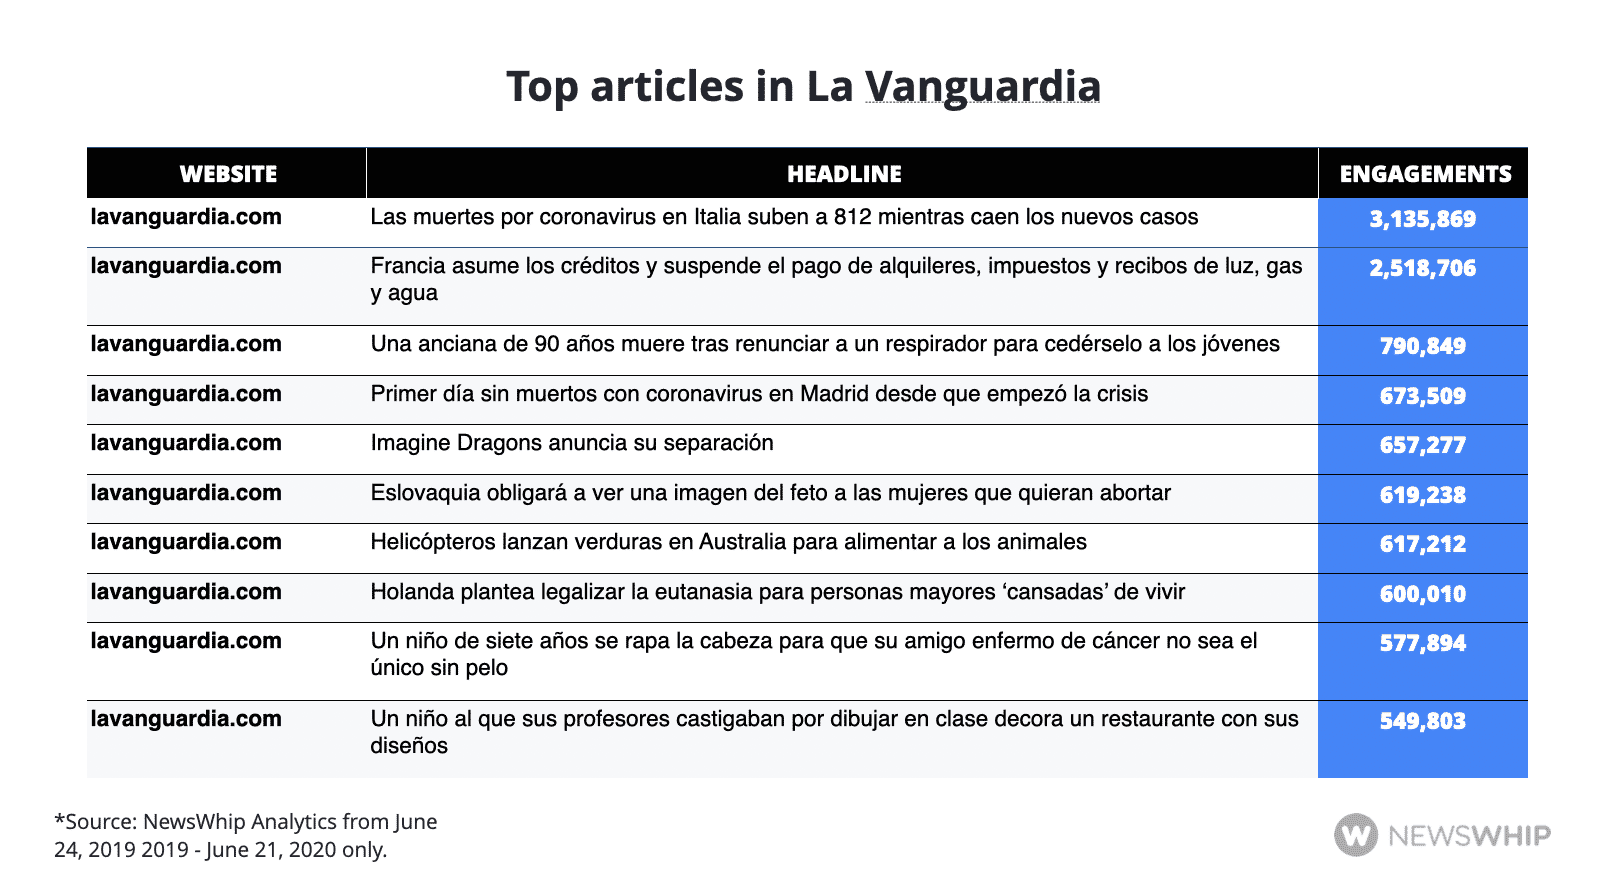 Table showing the most engaged articles in La Vanguardia, ranked by engagement